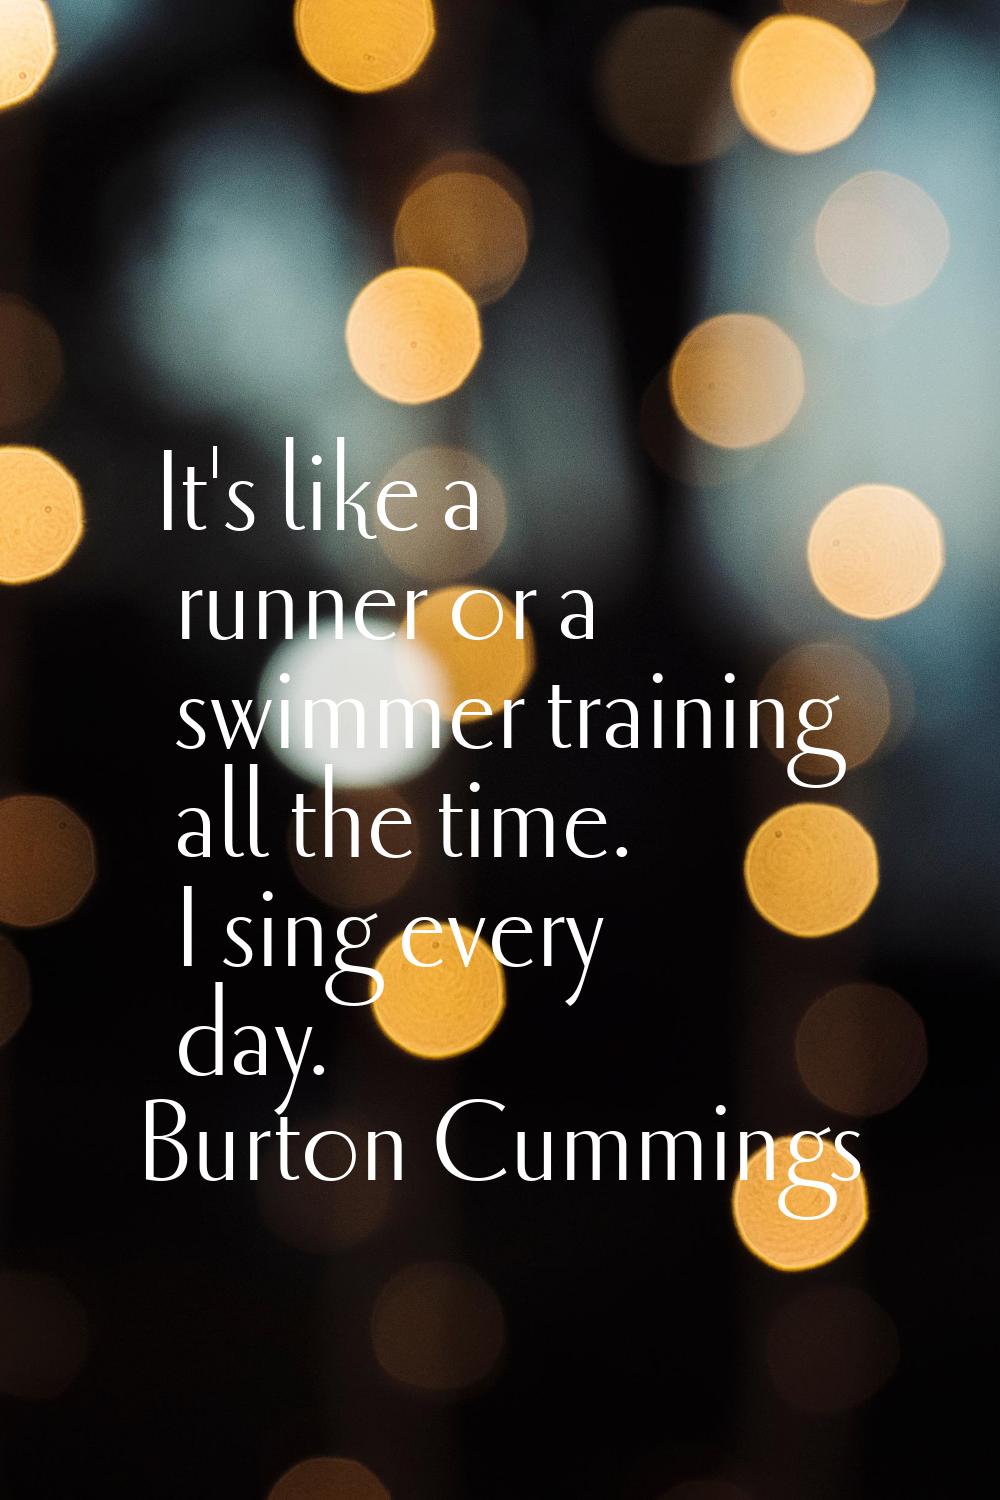 It's like a runner or a swimmer training all the time. I sing every day.